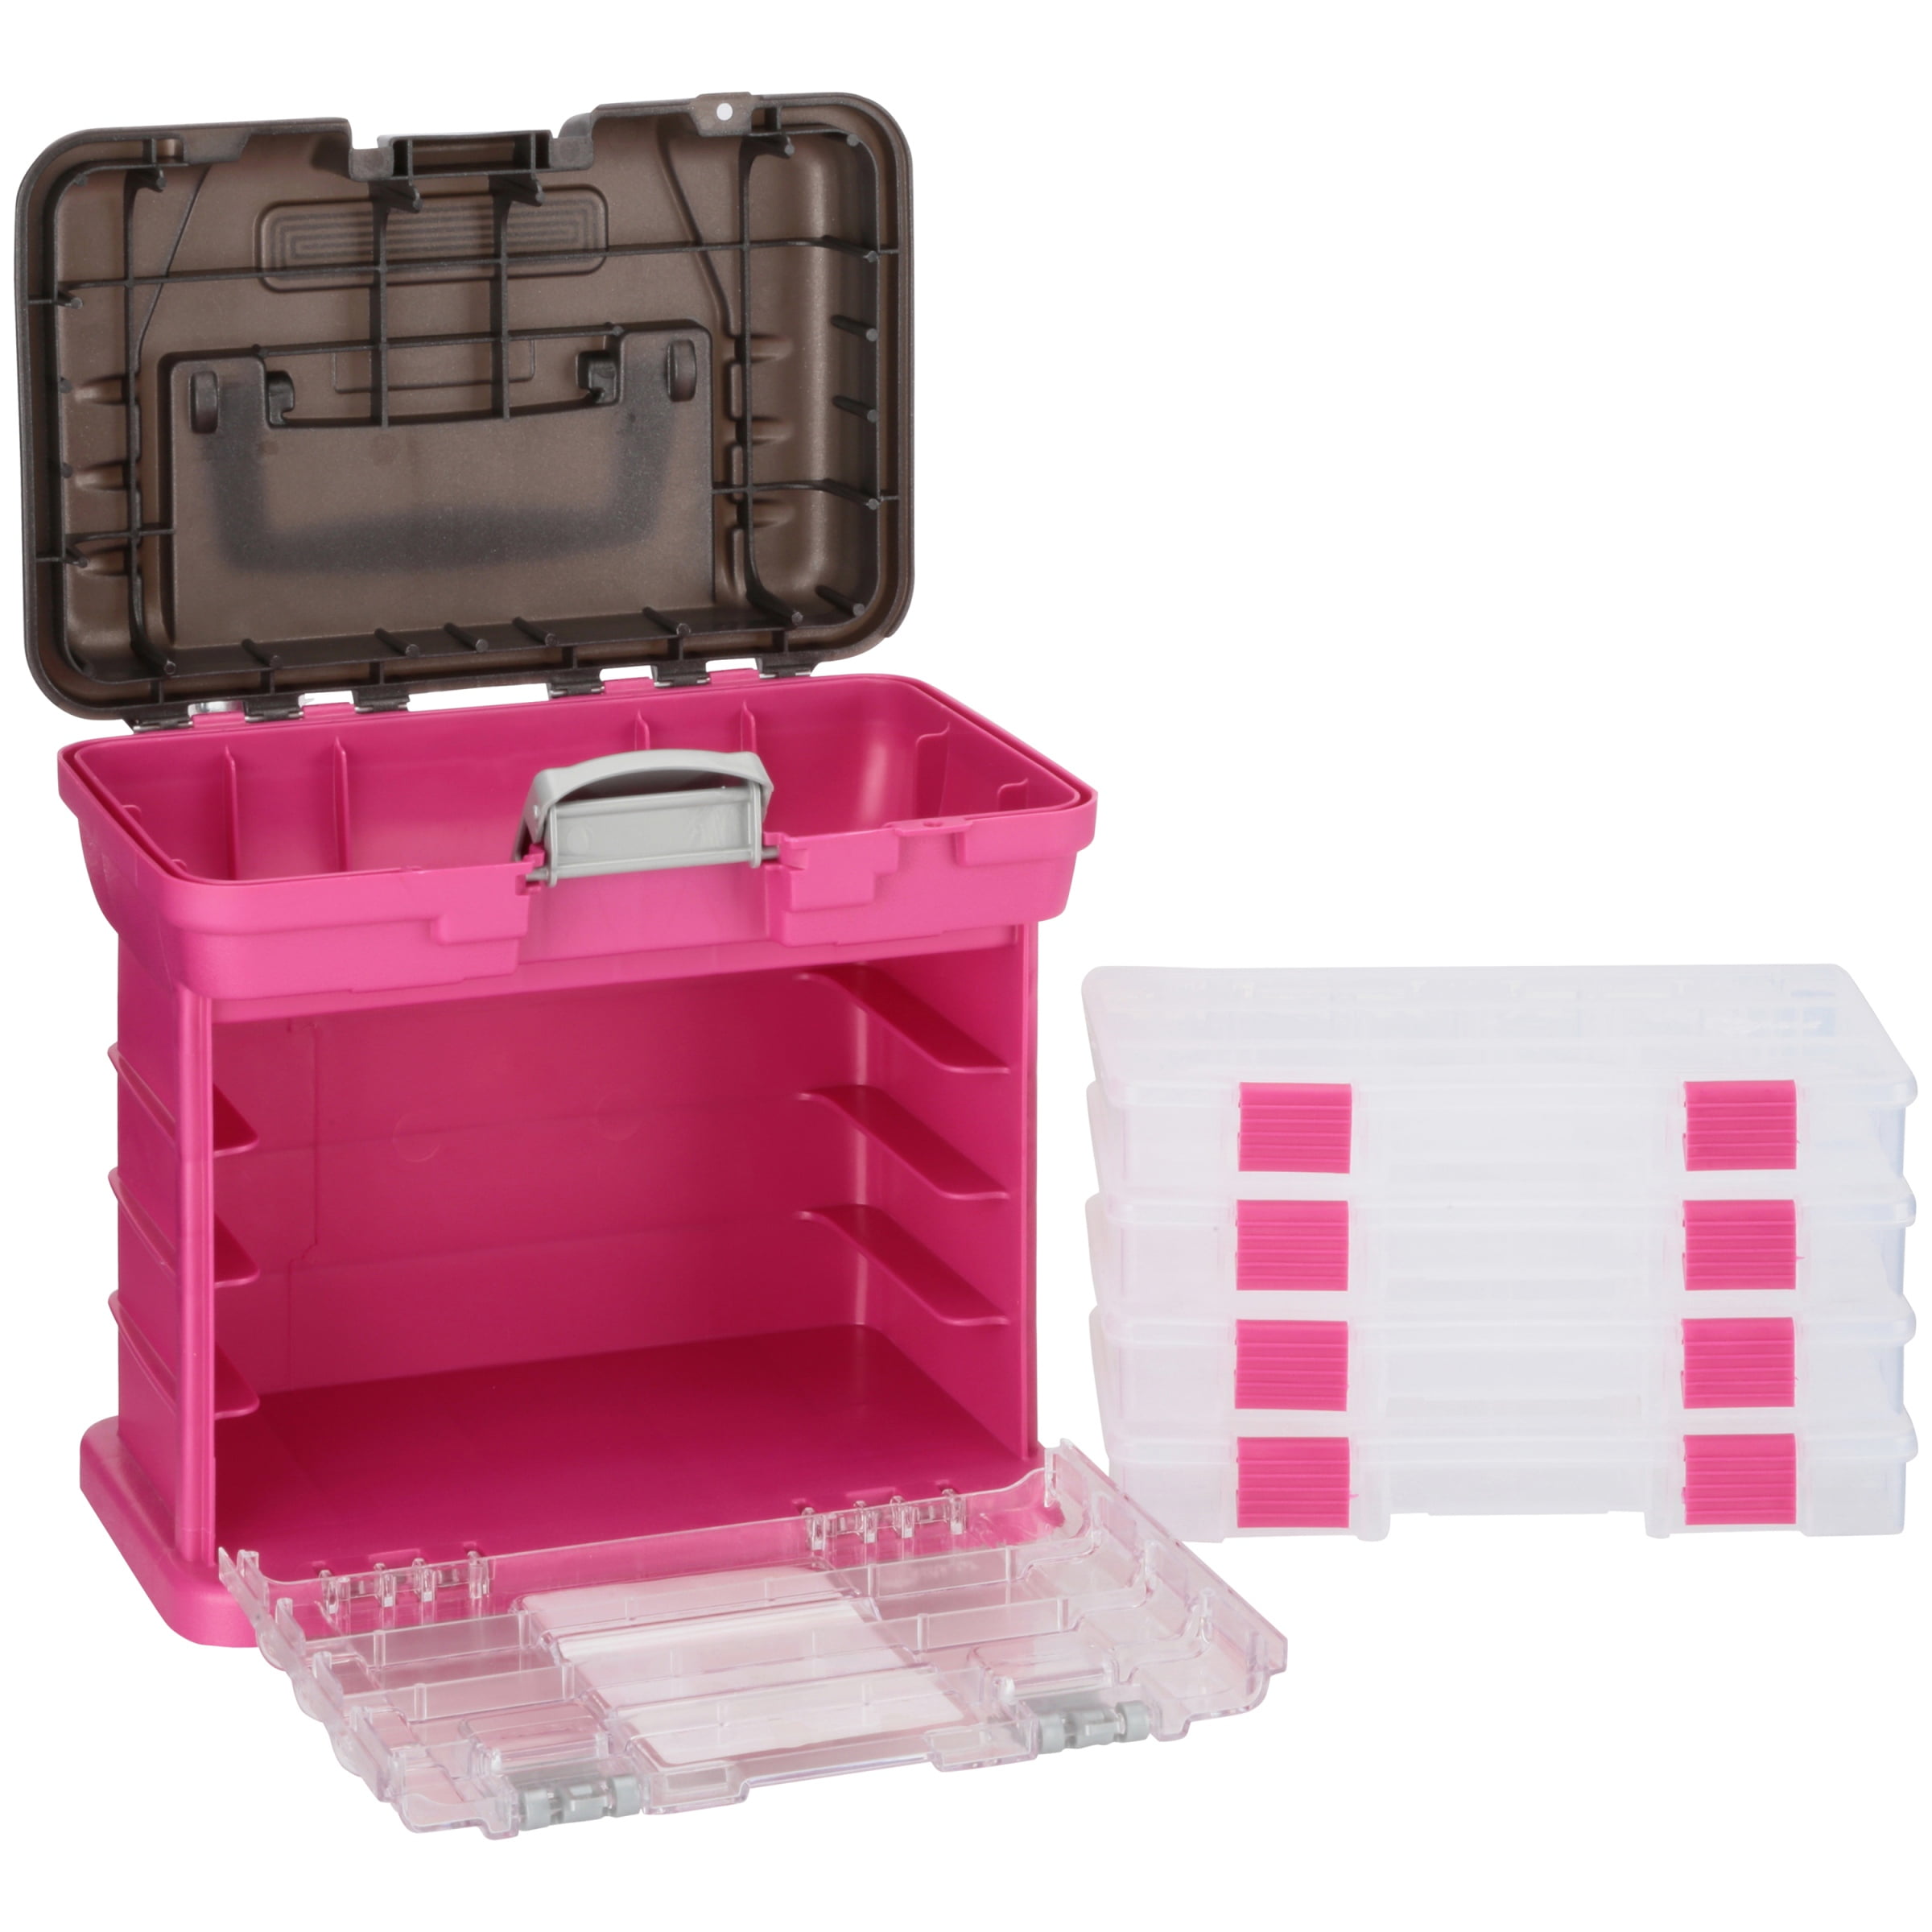 My favorite diecast cases, Creative Options Thread Organizers, are on sale  at Walmart.com… – LamleyGroup